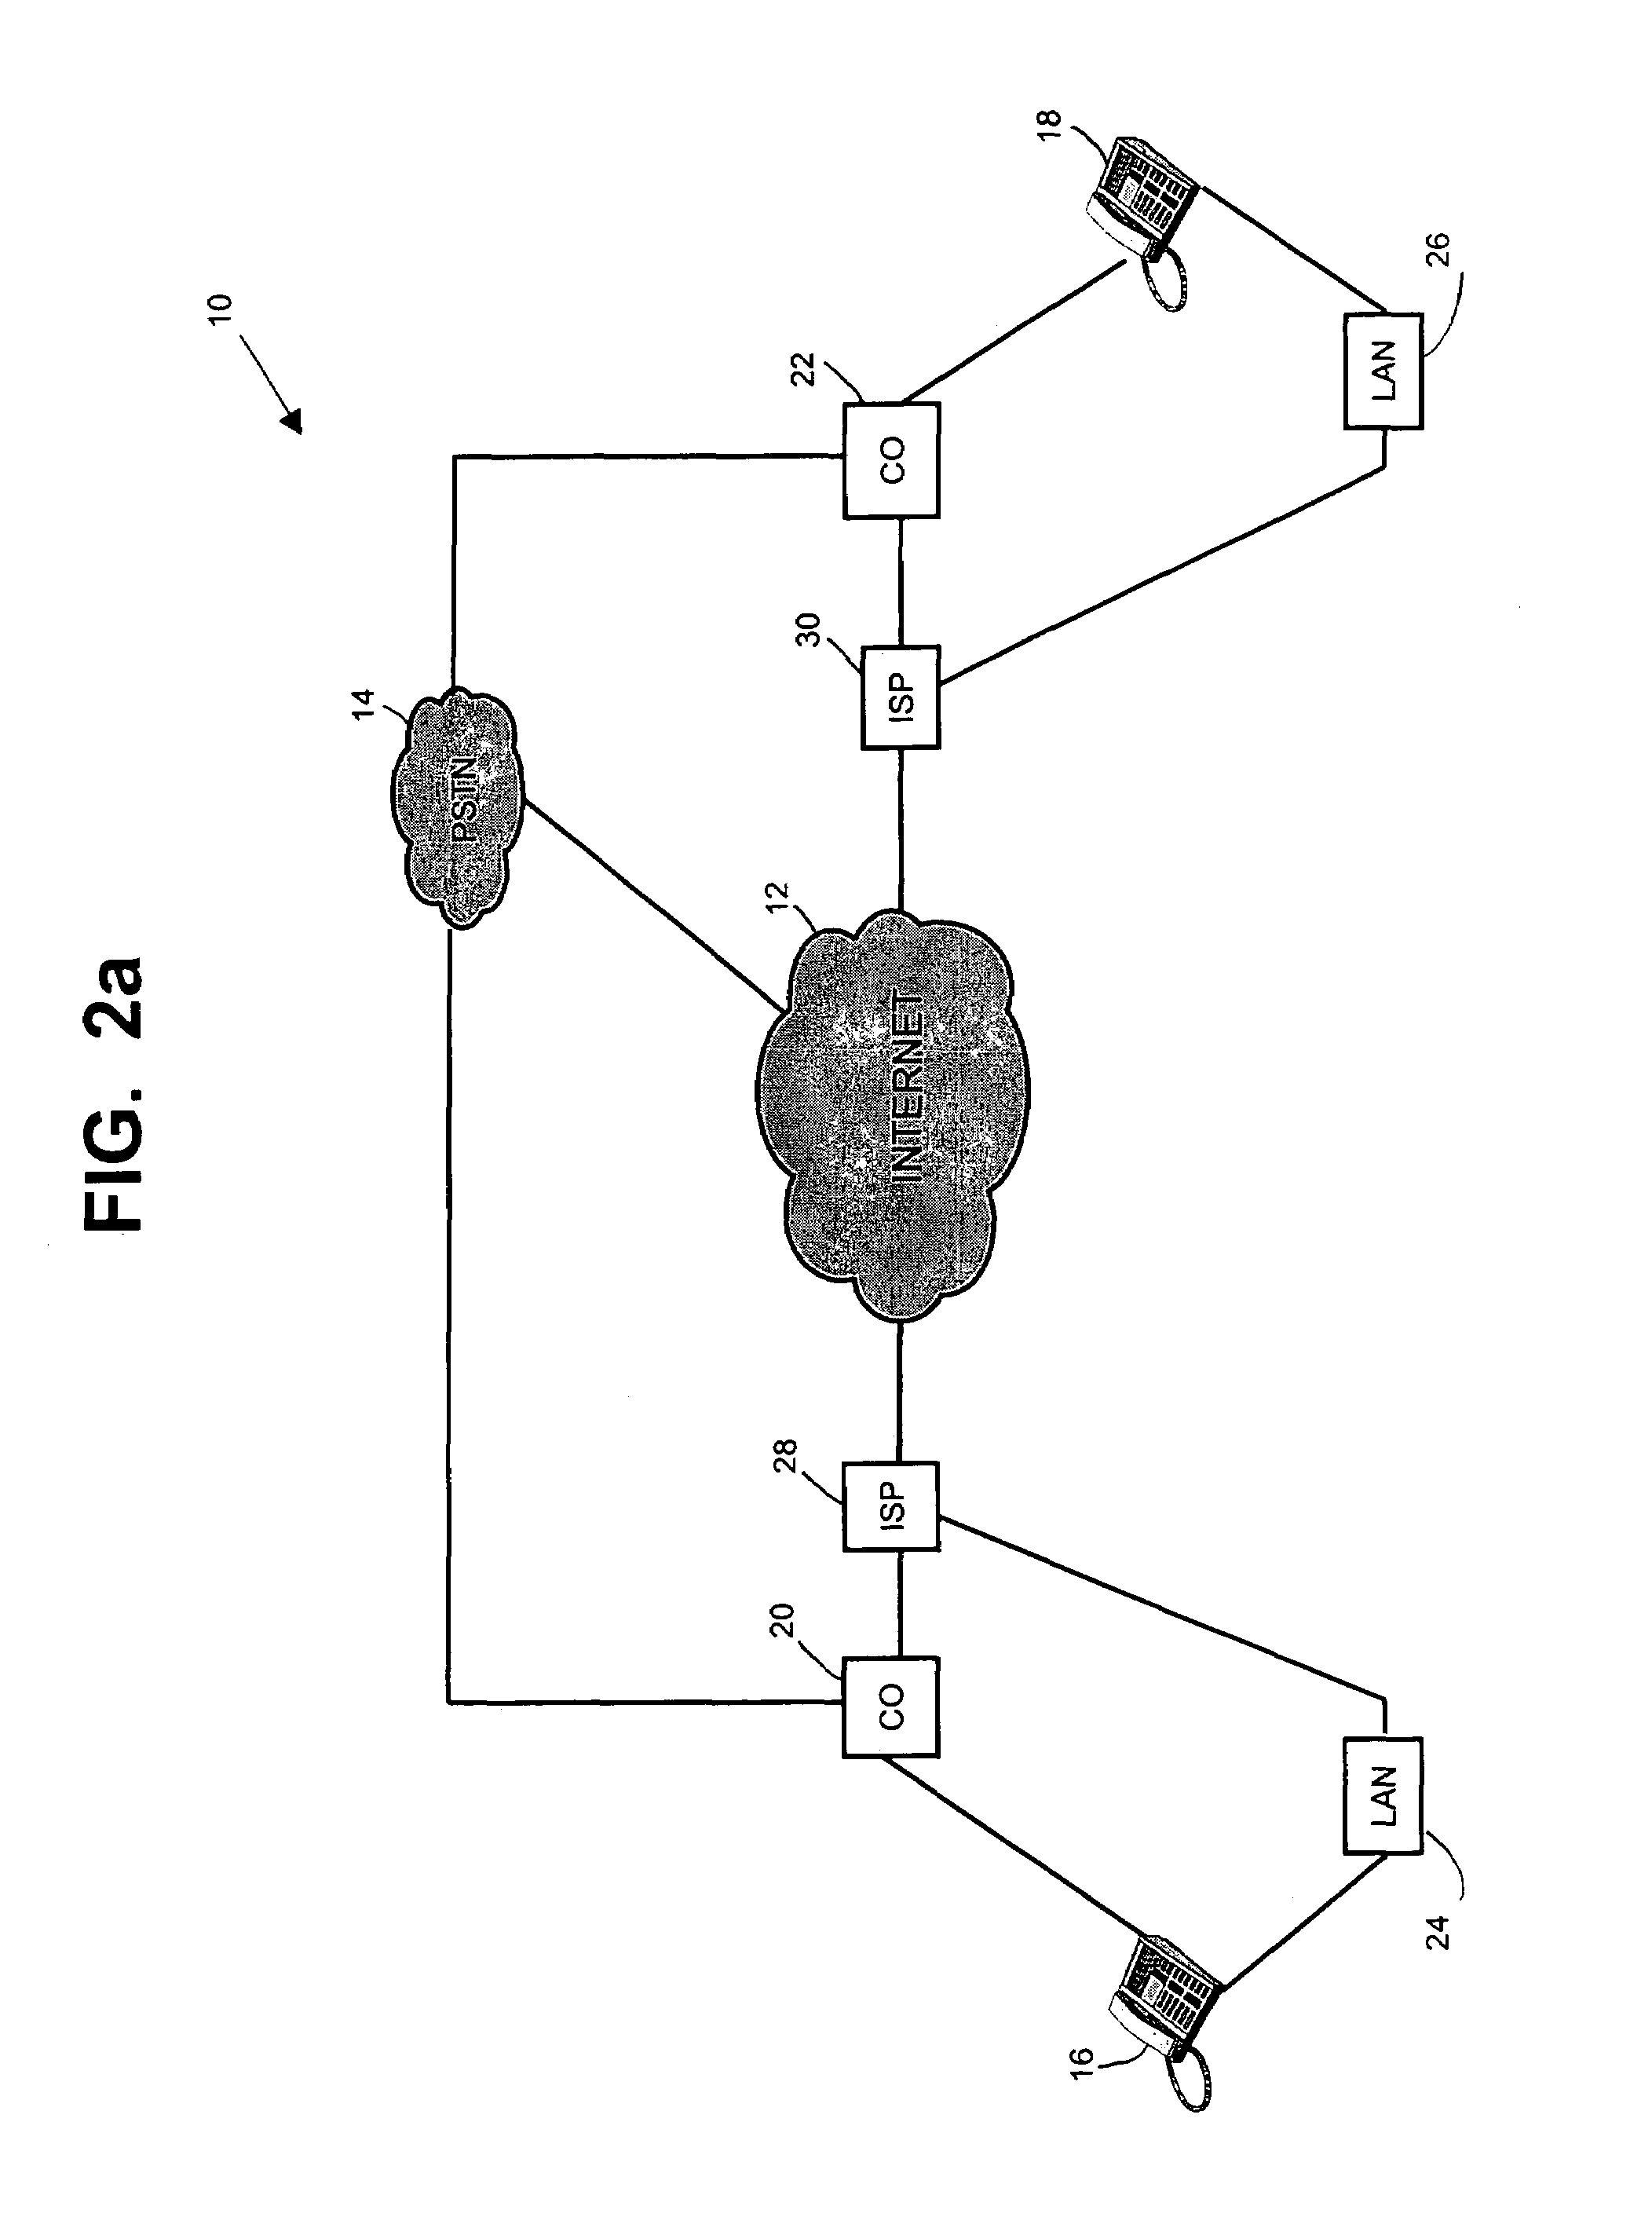 Method and system for providing voice communication over data networks